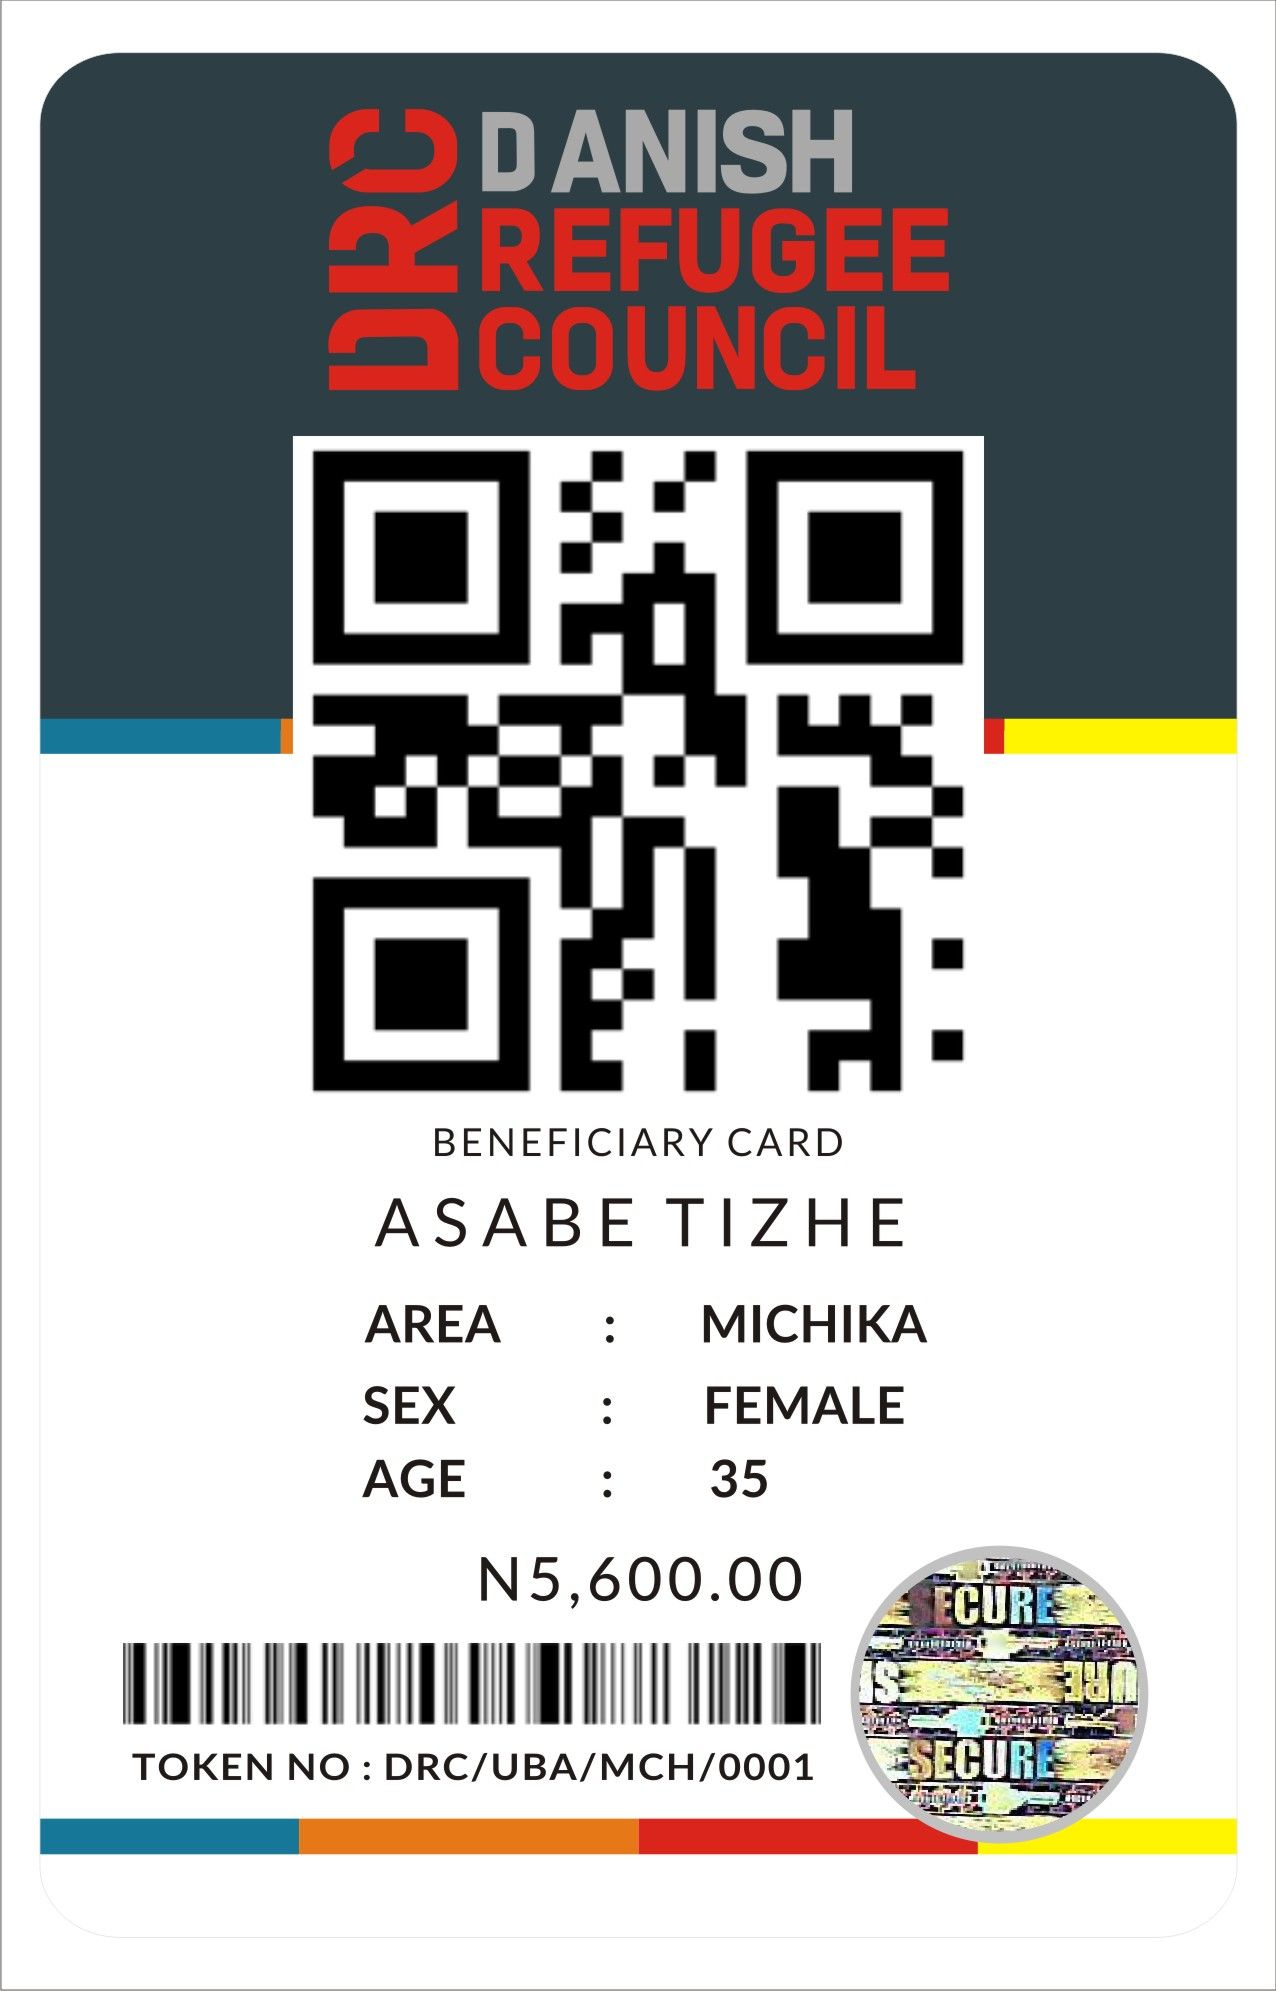 CALL CHINEDU ON 09022536974 TO PRINT QR CODES, BAR CODES AND UV INK